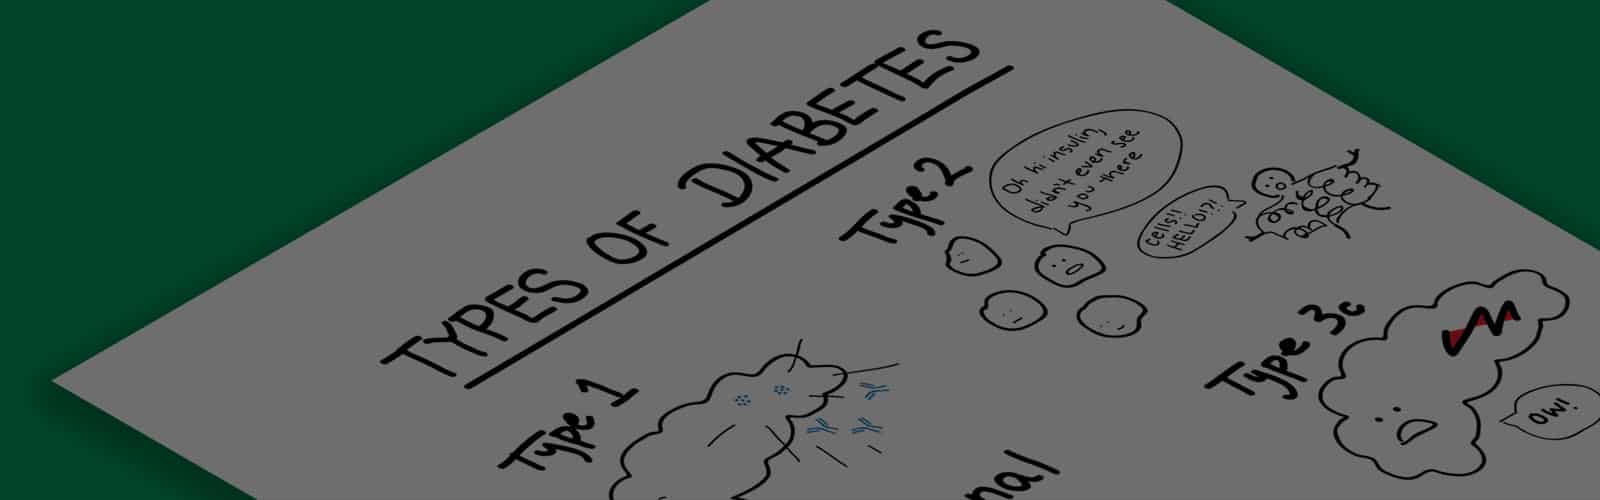 More Than 1 and 2: Exploring Different Types of Diabetes